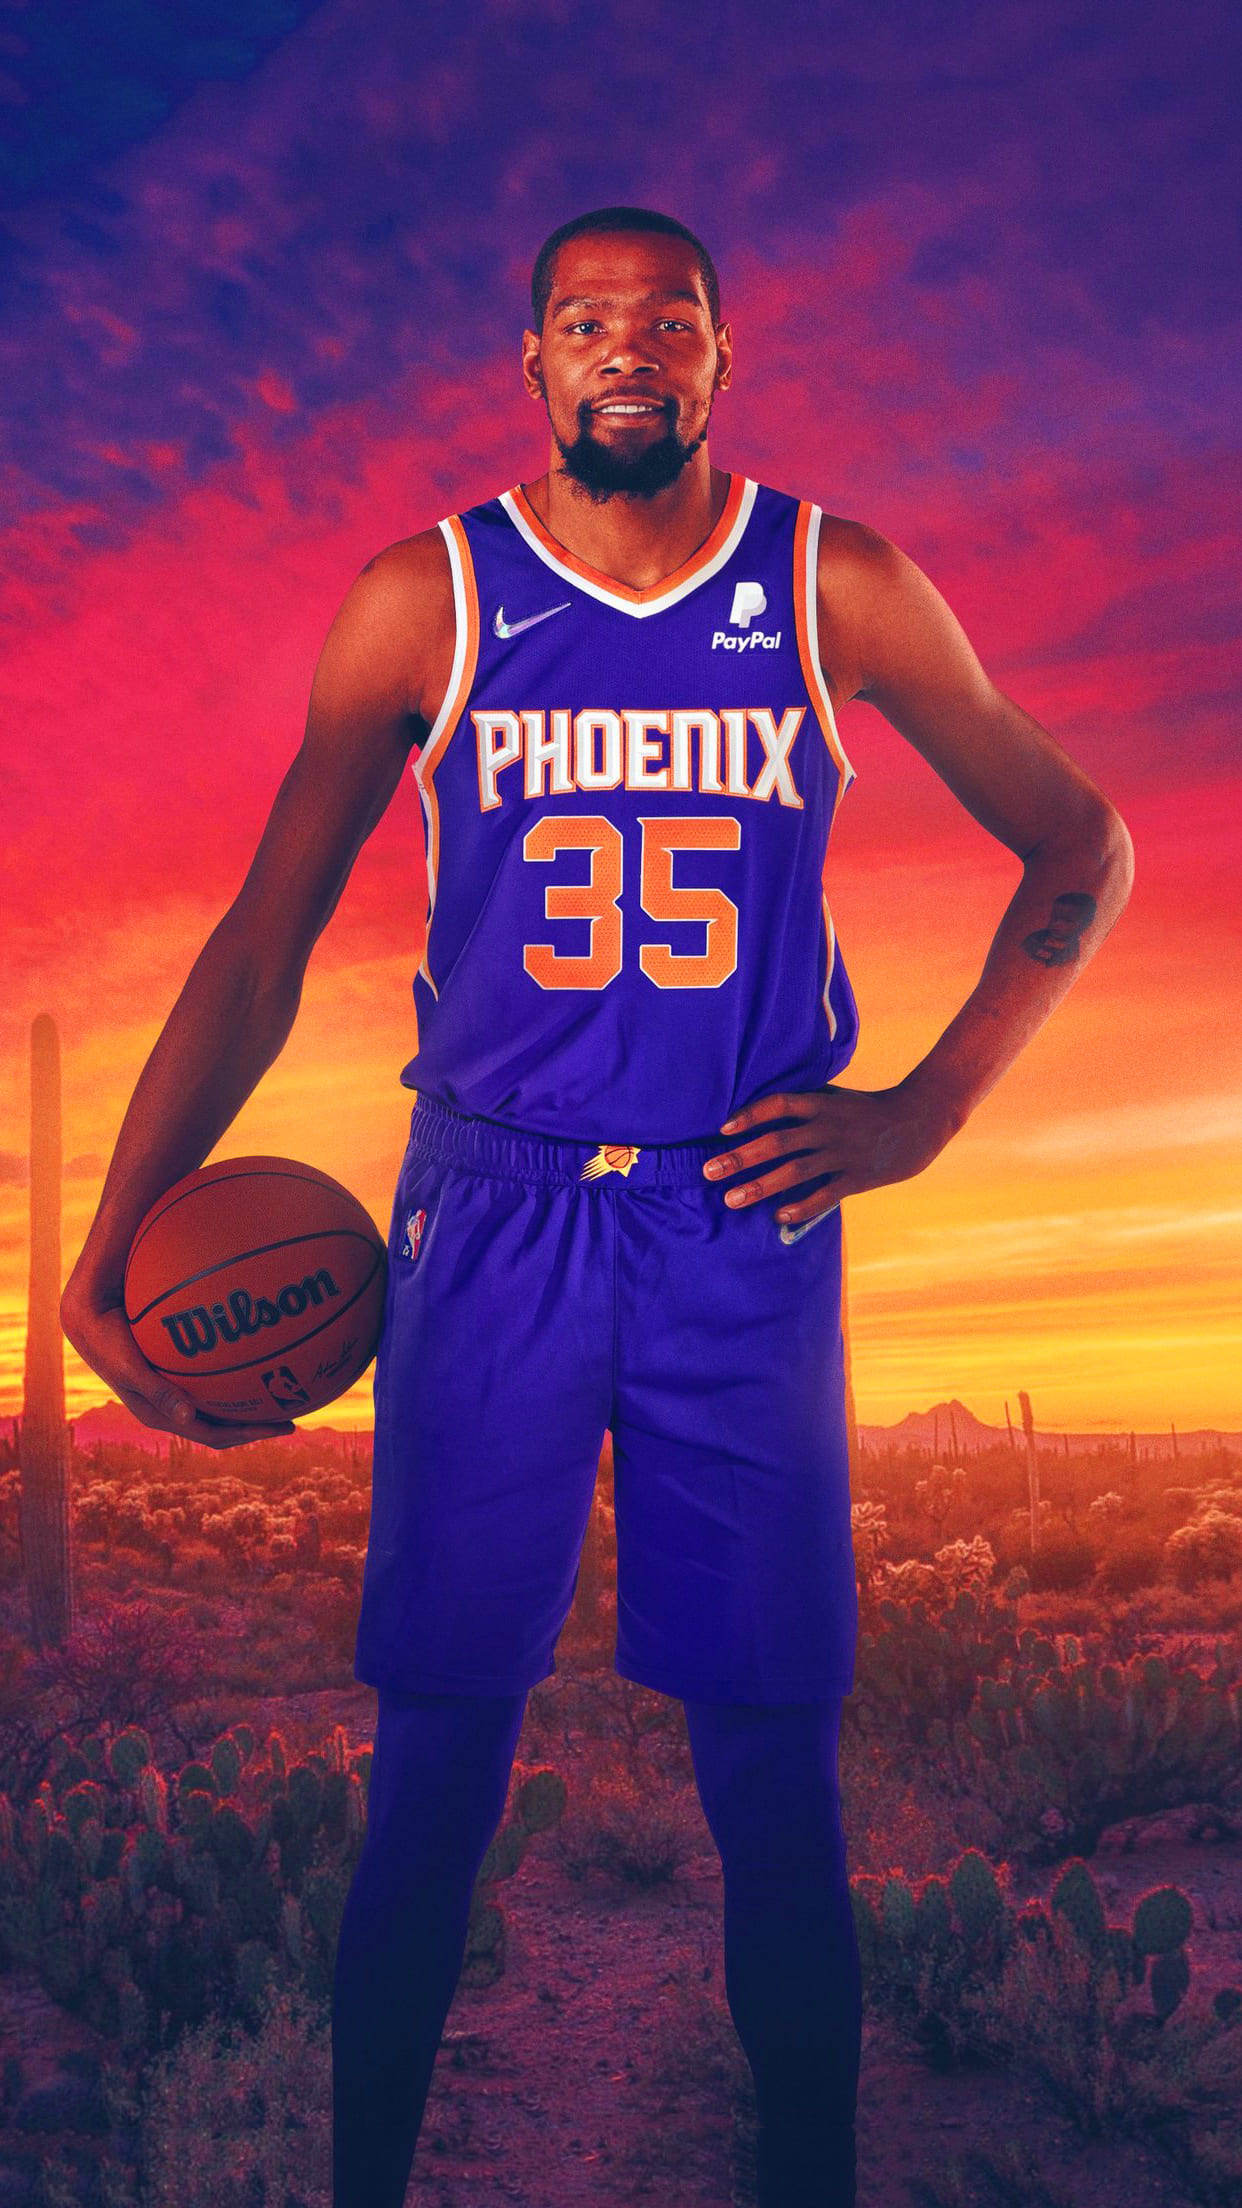 Share 69+ kevin durant wallpaper latest - in.cdgdbentre